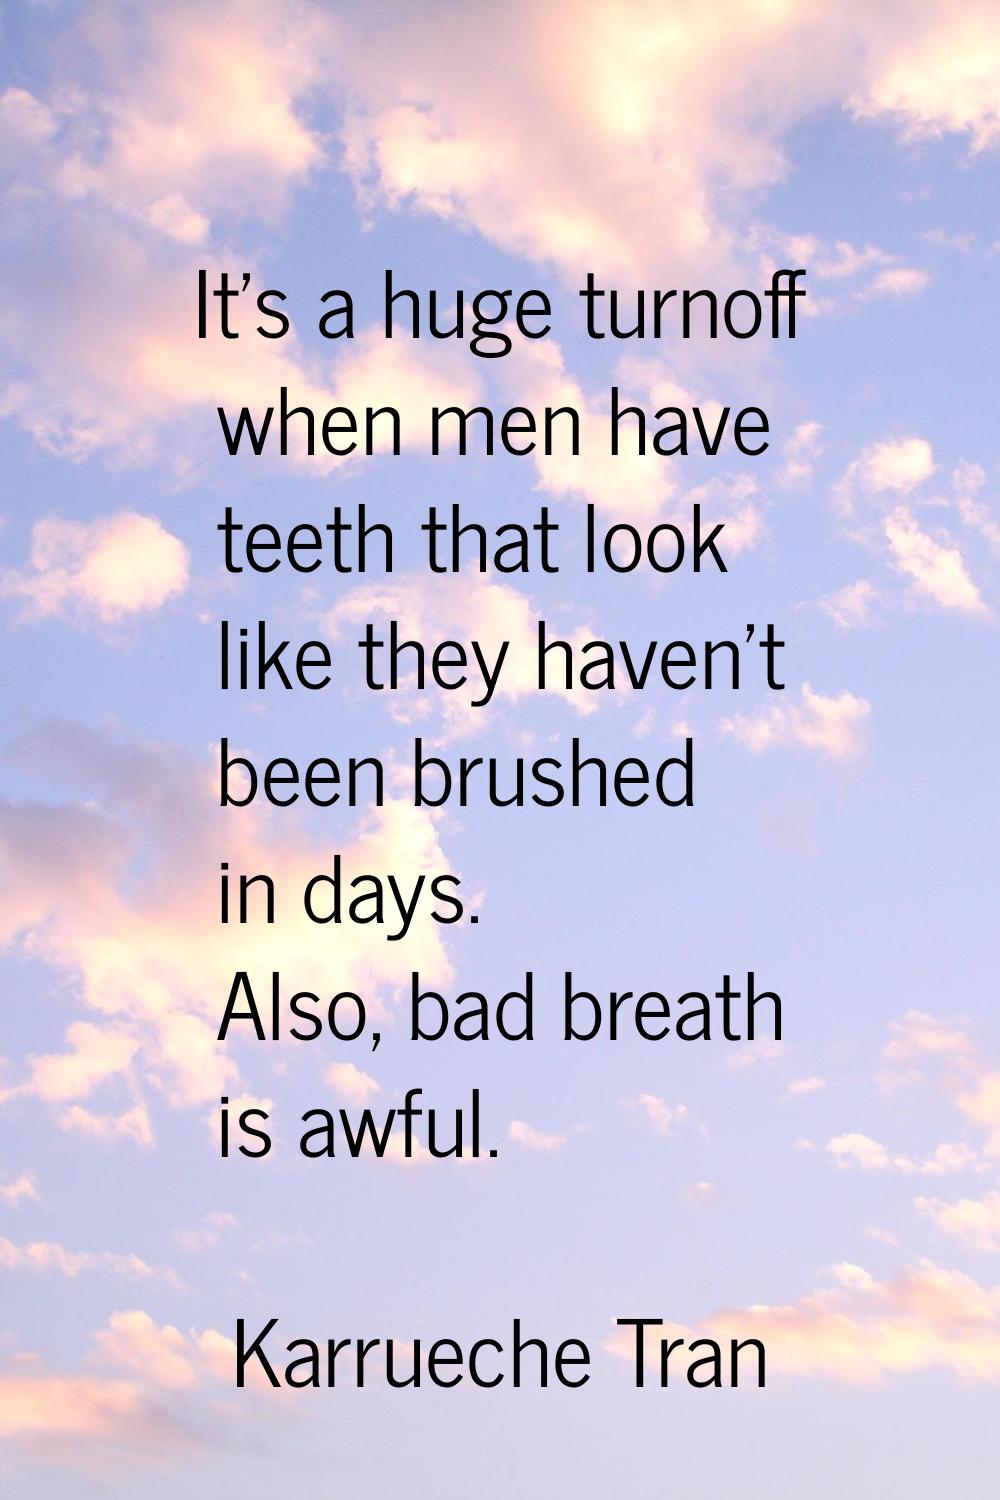 It's a huge turnoff when men have teeth that look like they haven't been brushed in days. Also, bad